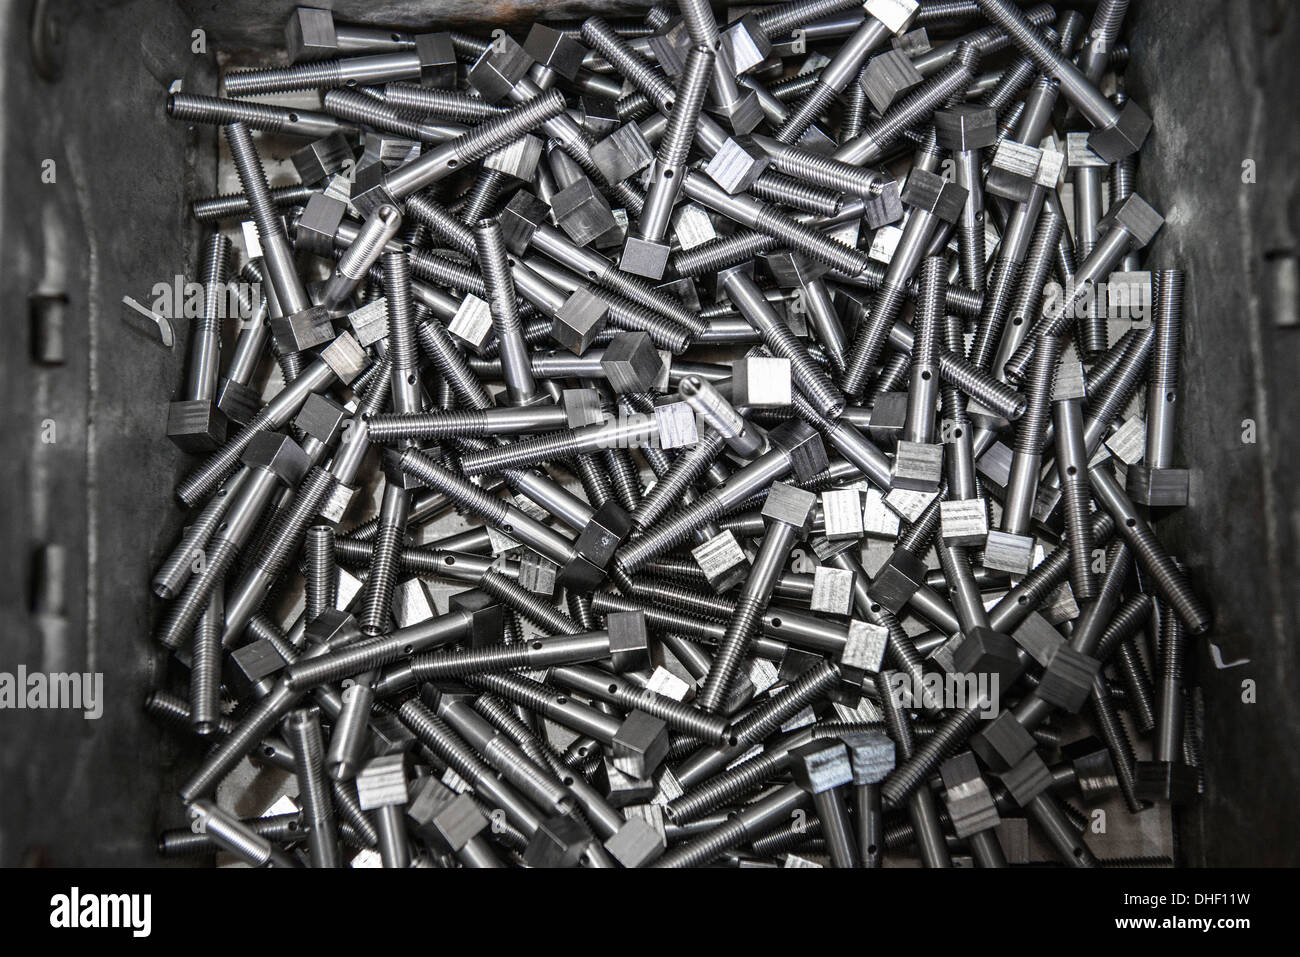 Large group of engineered steel parts in factory Stock Photo